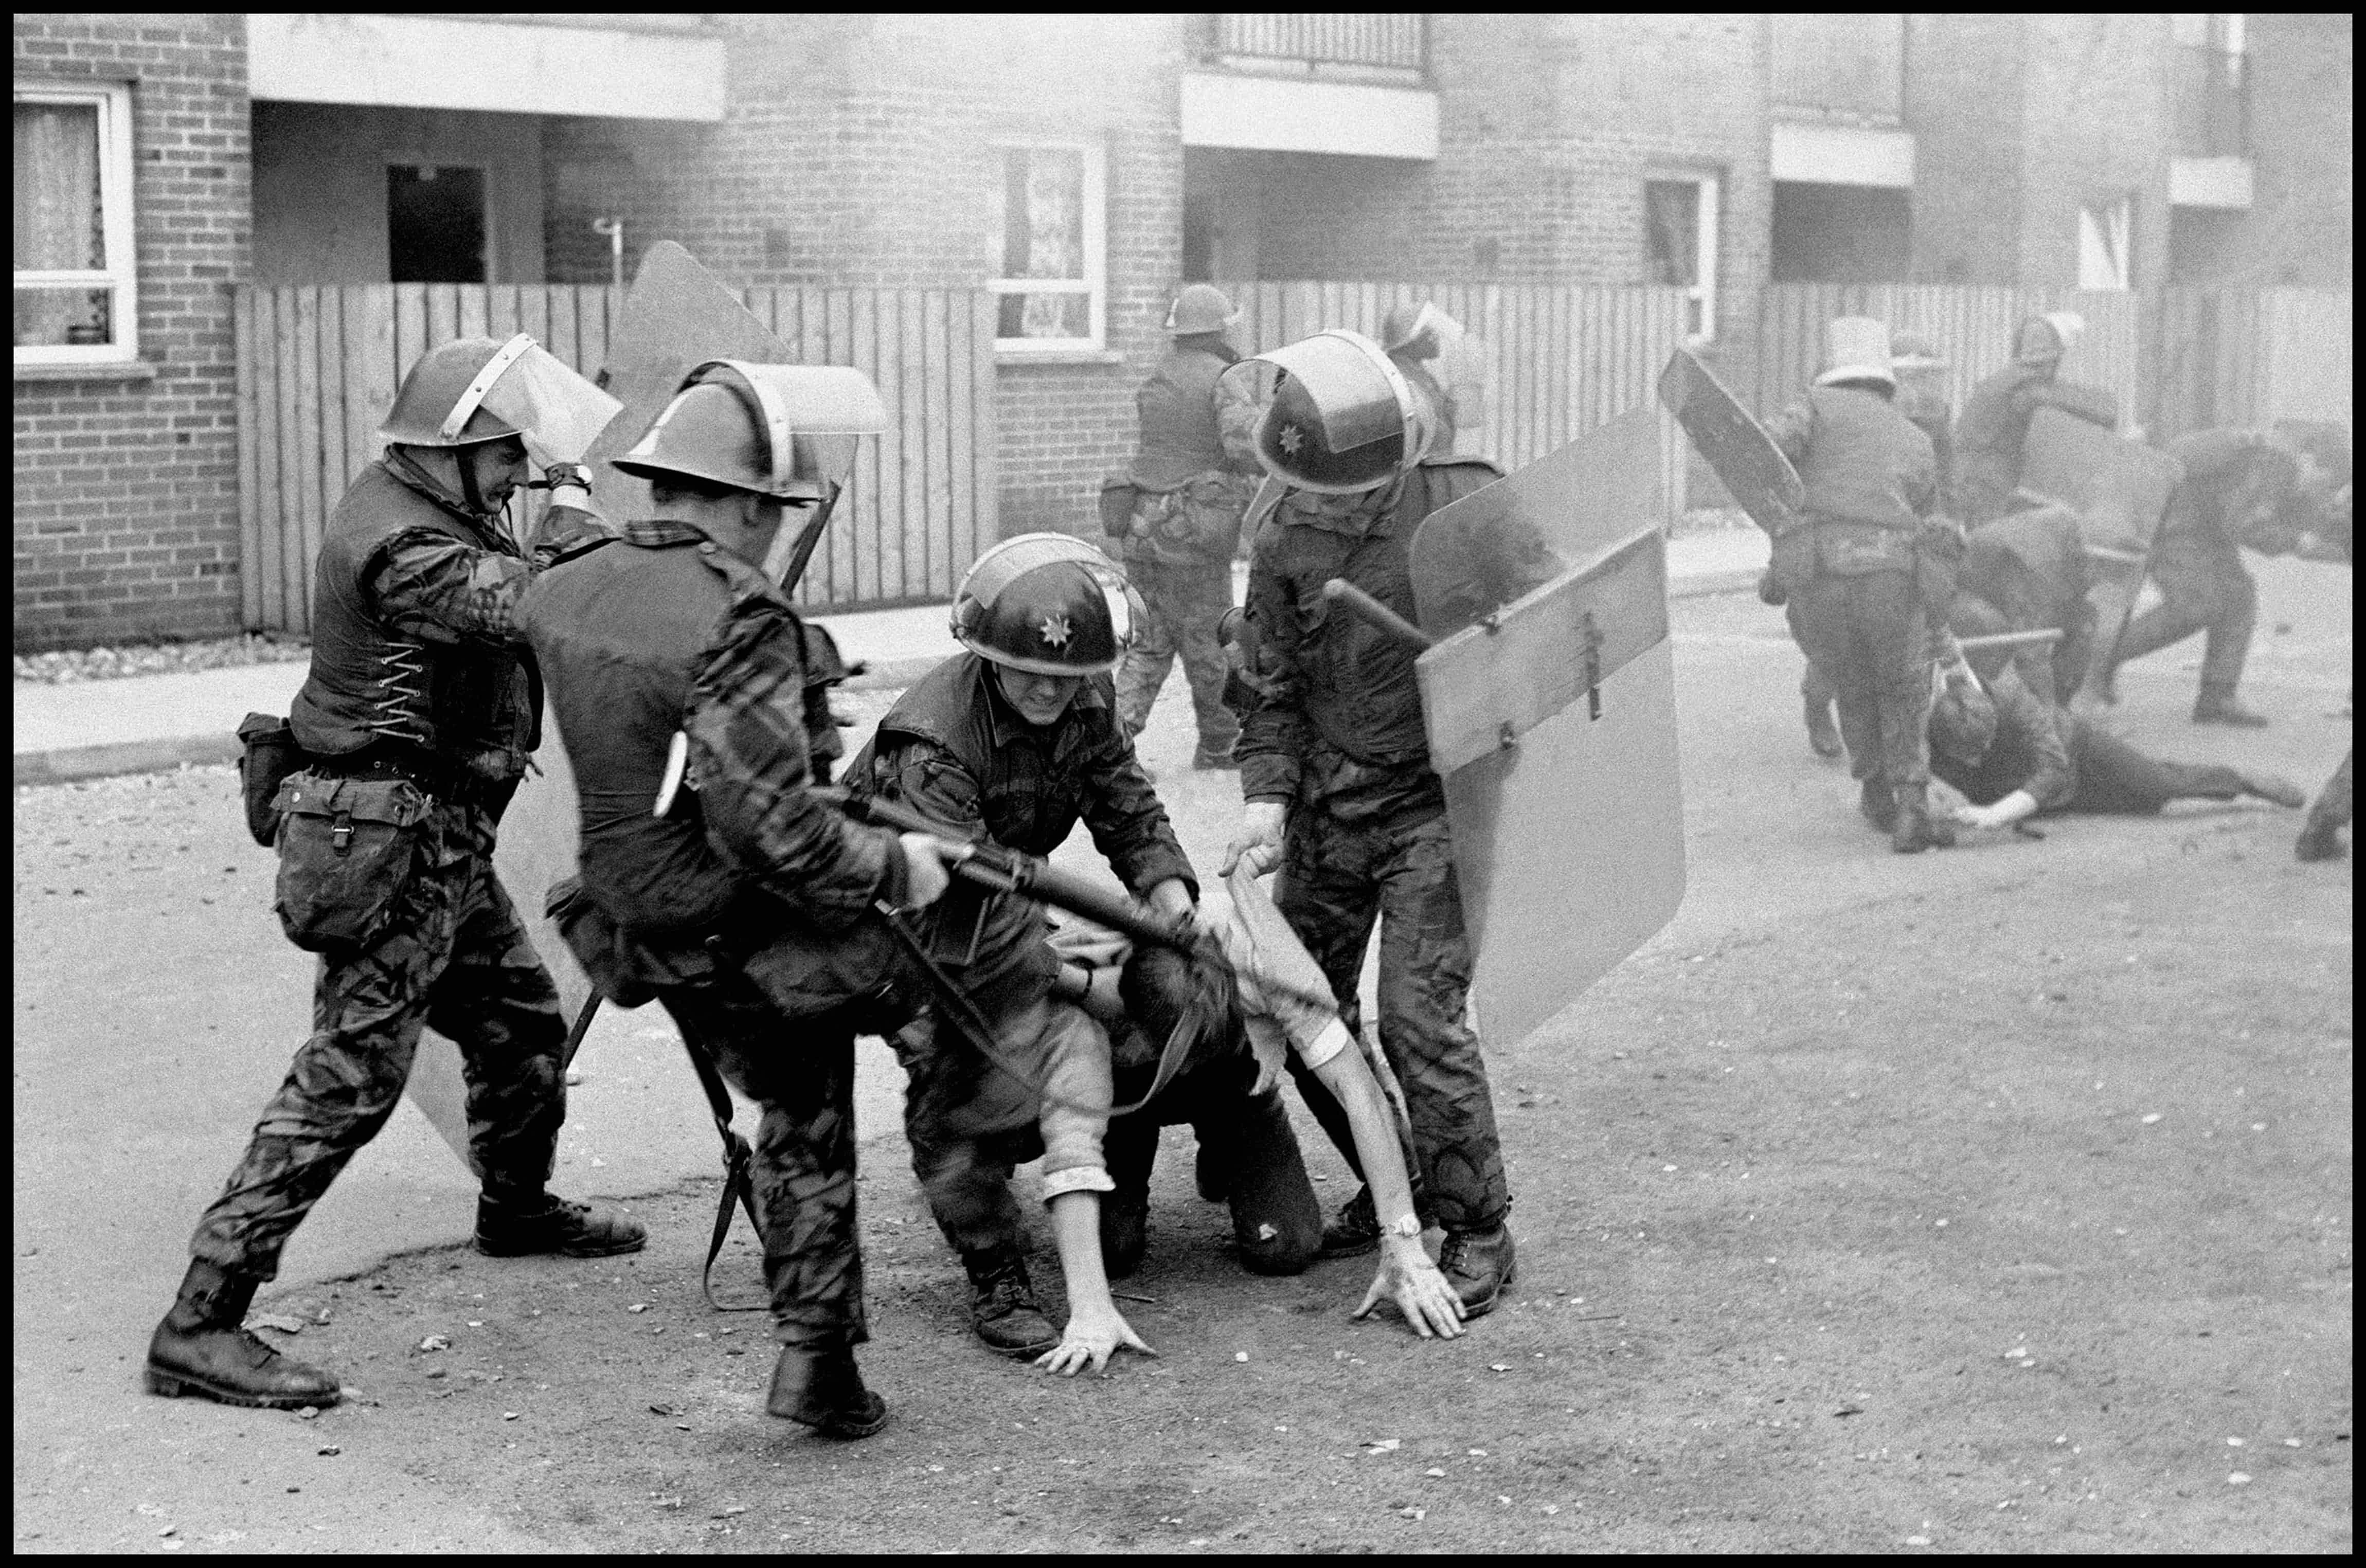 British soldiers drag ringleaders from a rock-throwing group and beat them severely. 1971. (c) Ian Berry